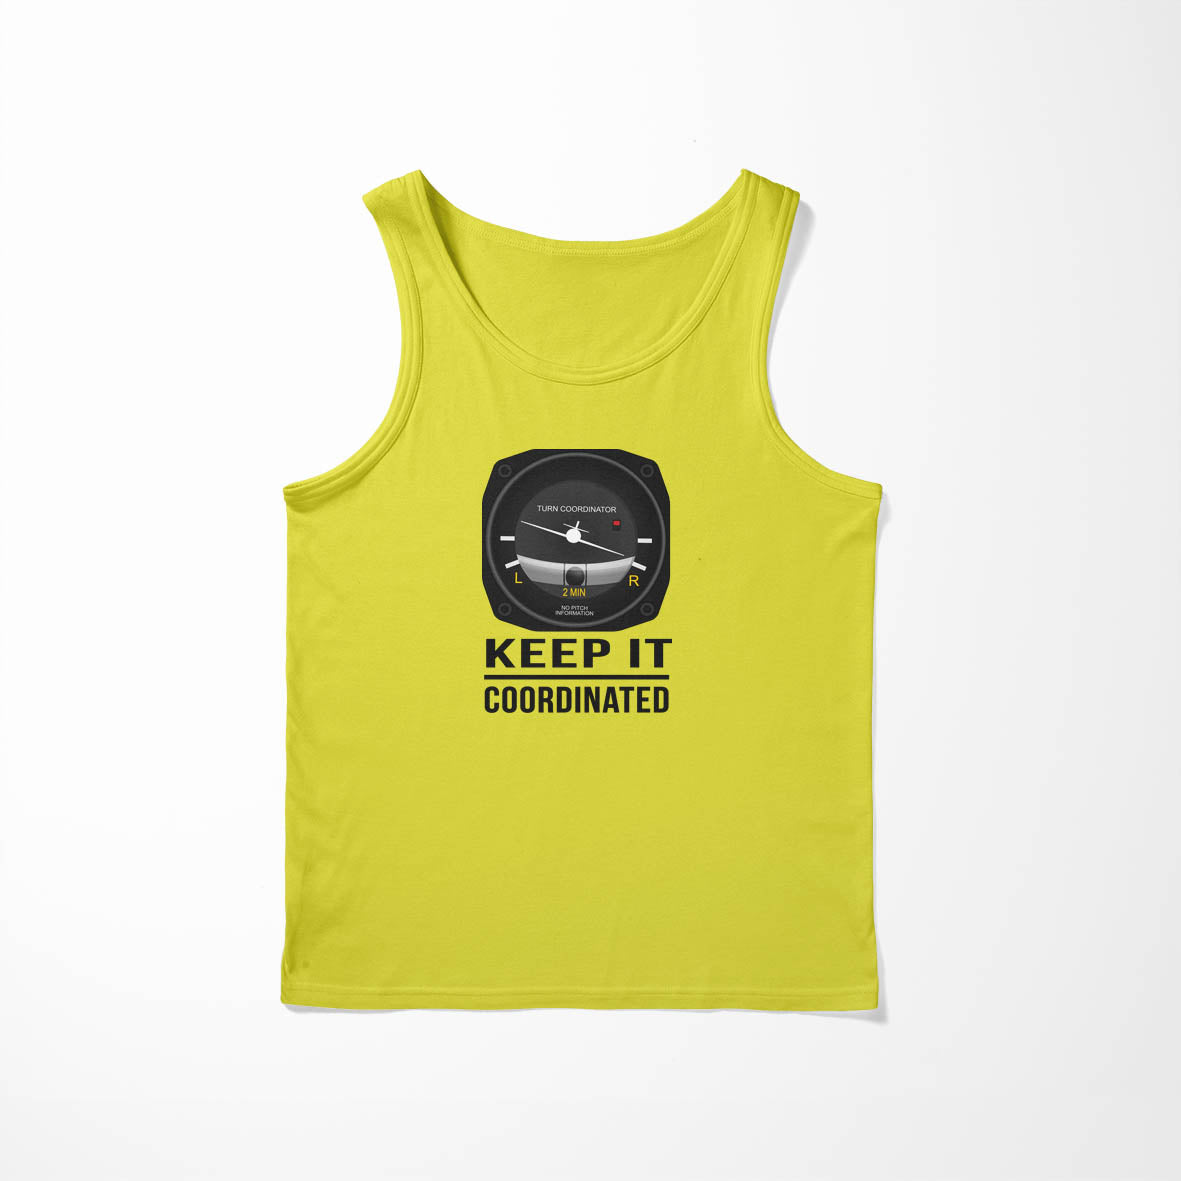 Keep It Coordinated Designed Tank Tops